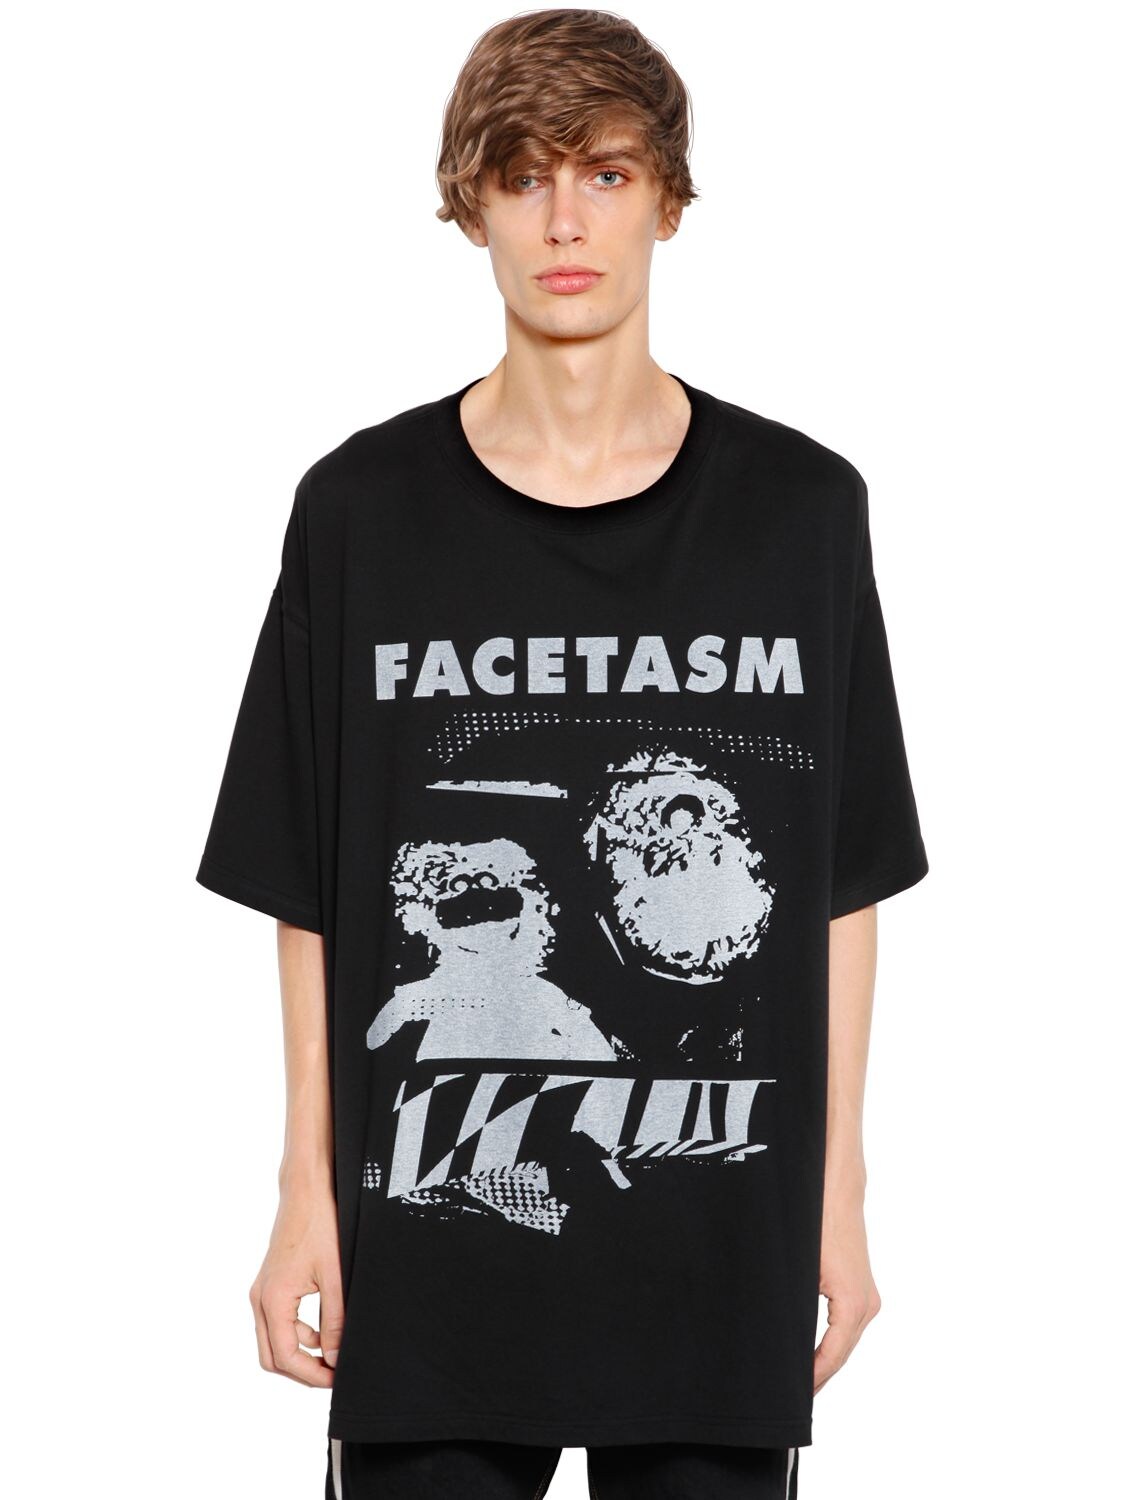 FACETASM OVERSIZE PRINTED COTTON JERSEY T-SHIRT,67IS34025-QKXBSW2